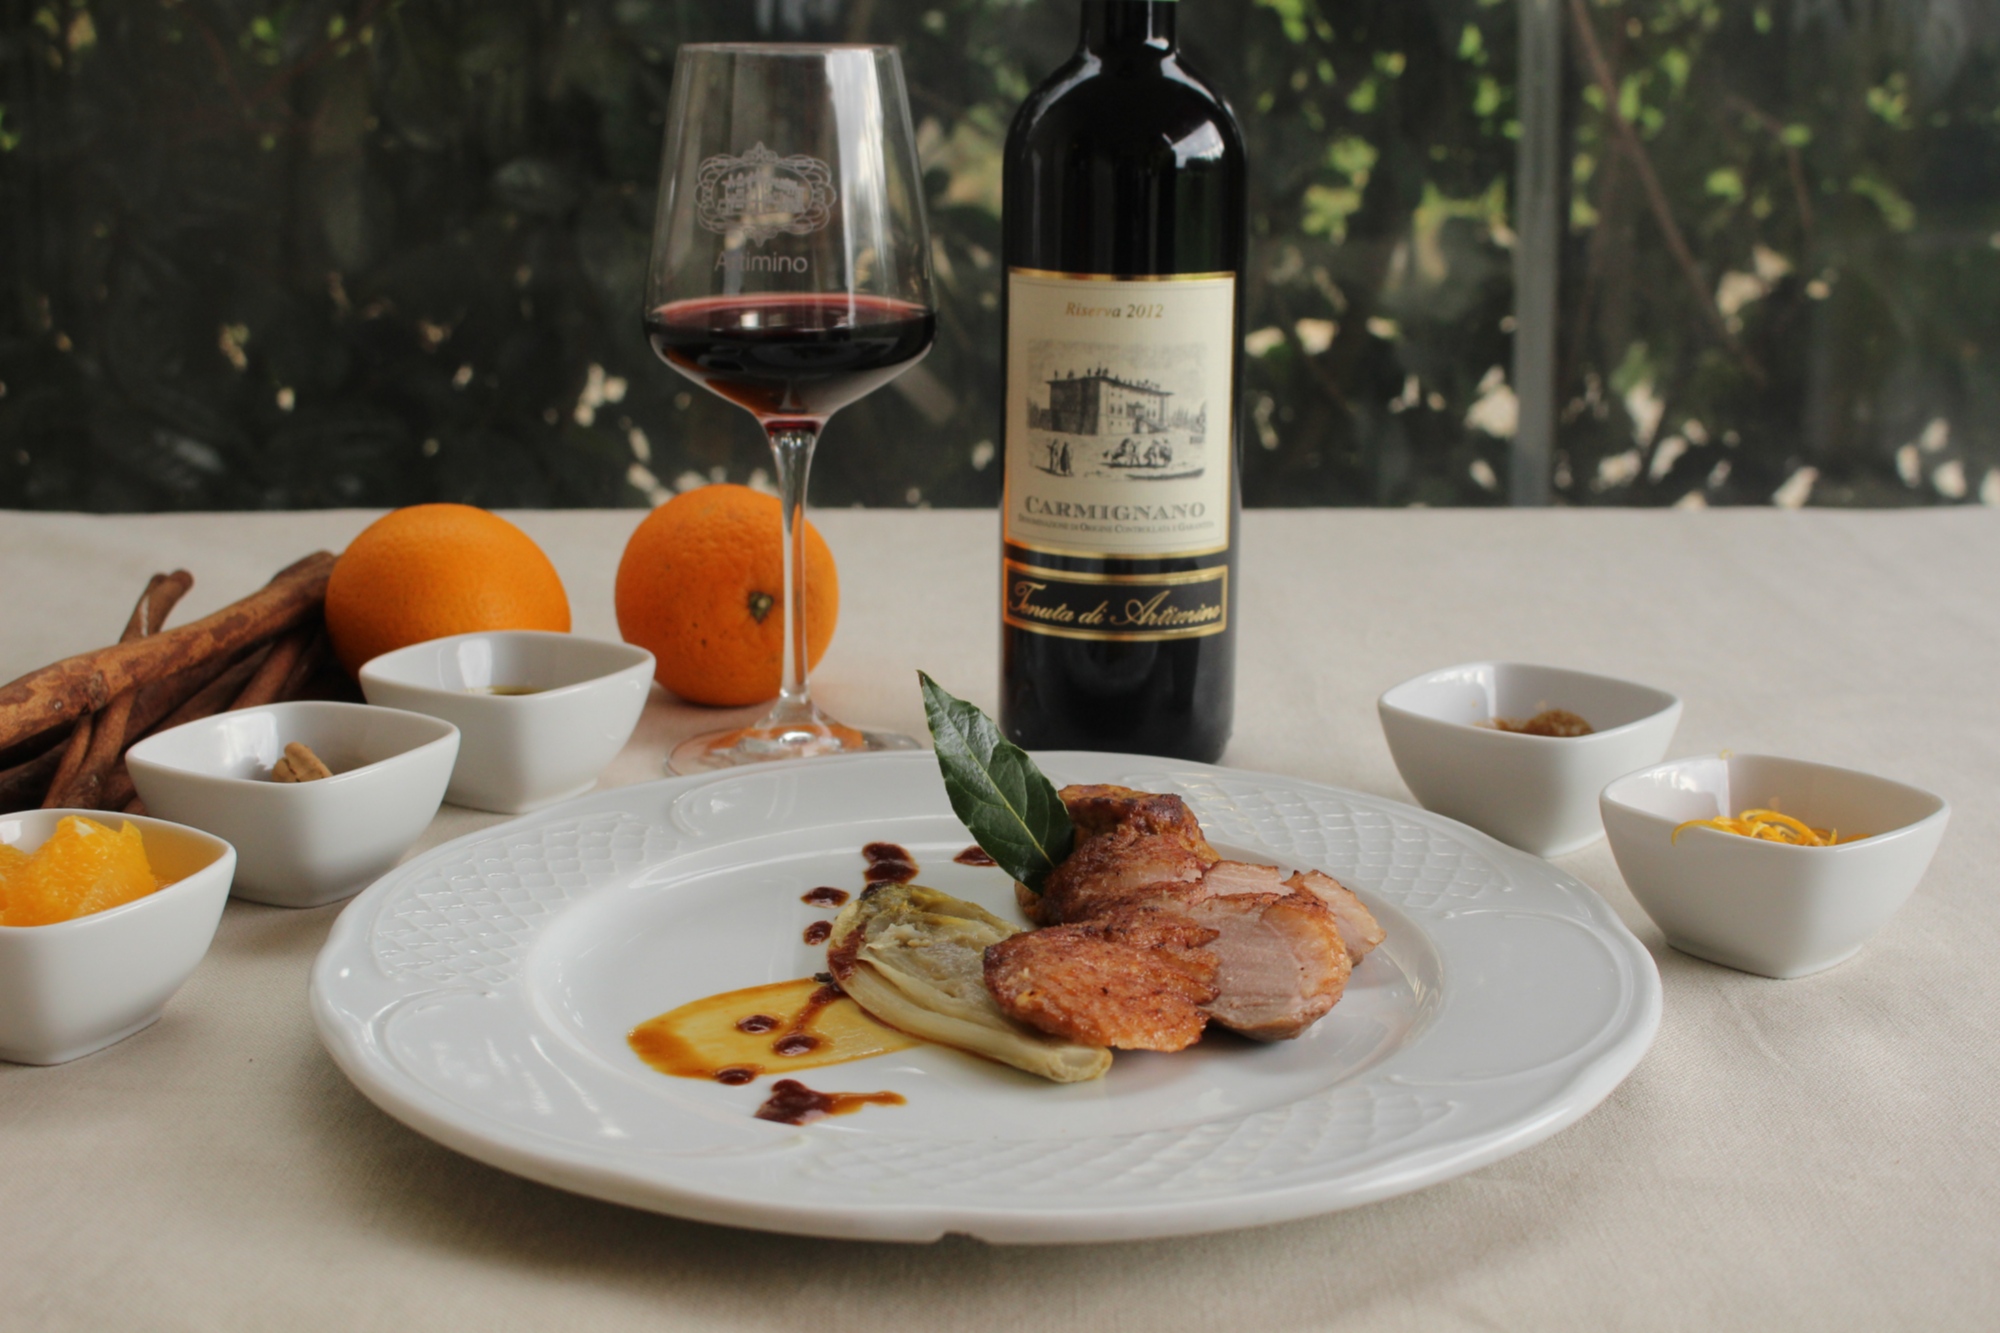 Duck with orange paired with Carmignano wine